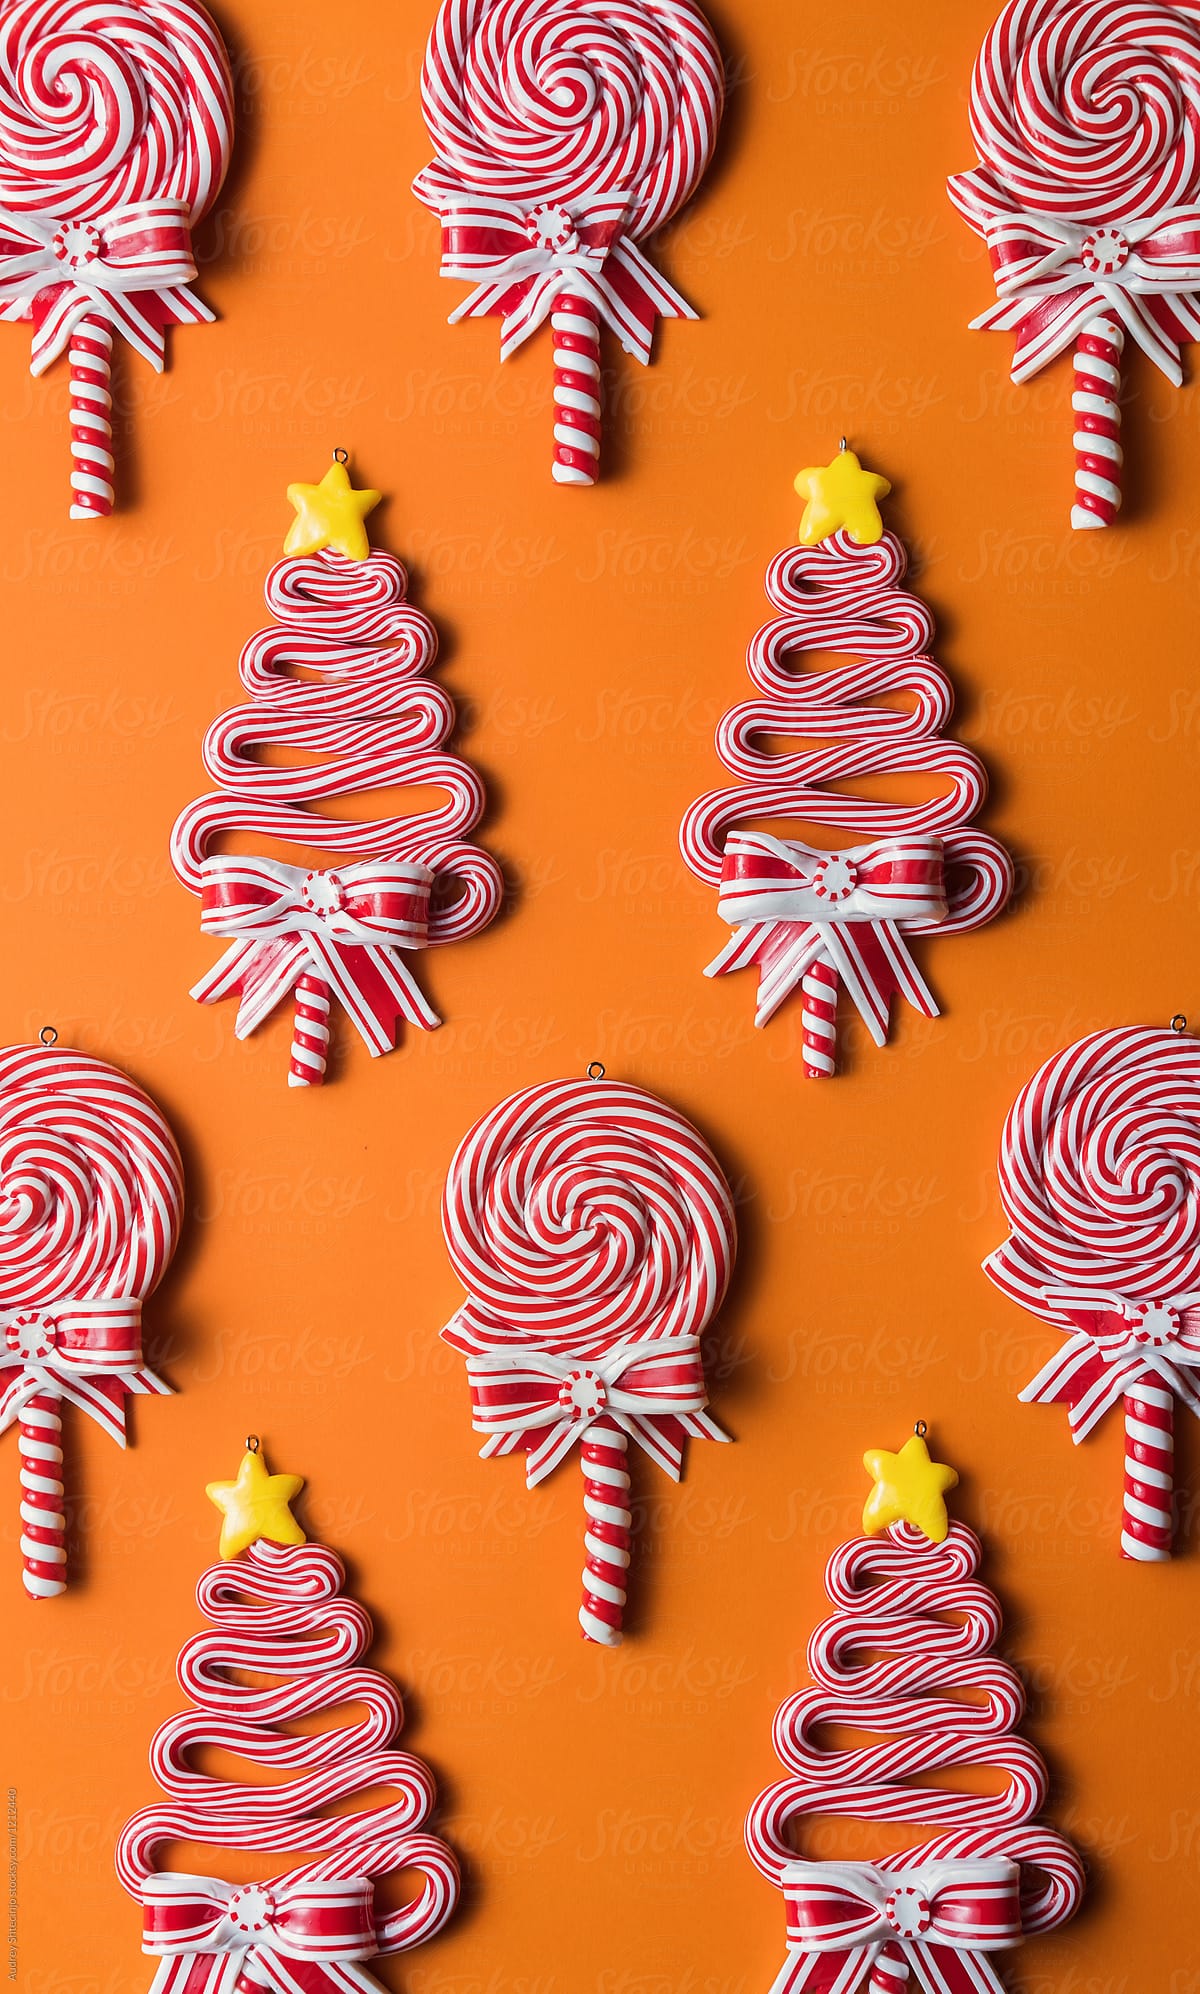 Various/Lollipop sweets decorations and small presents on orange background